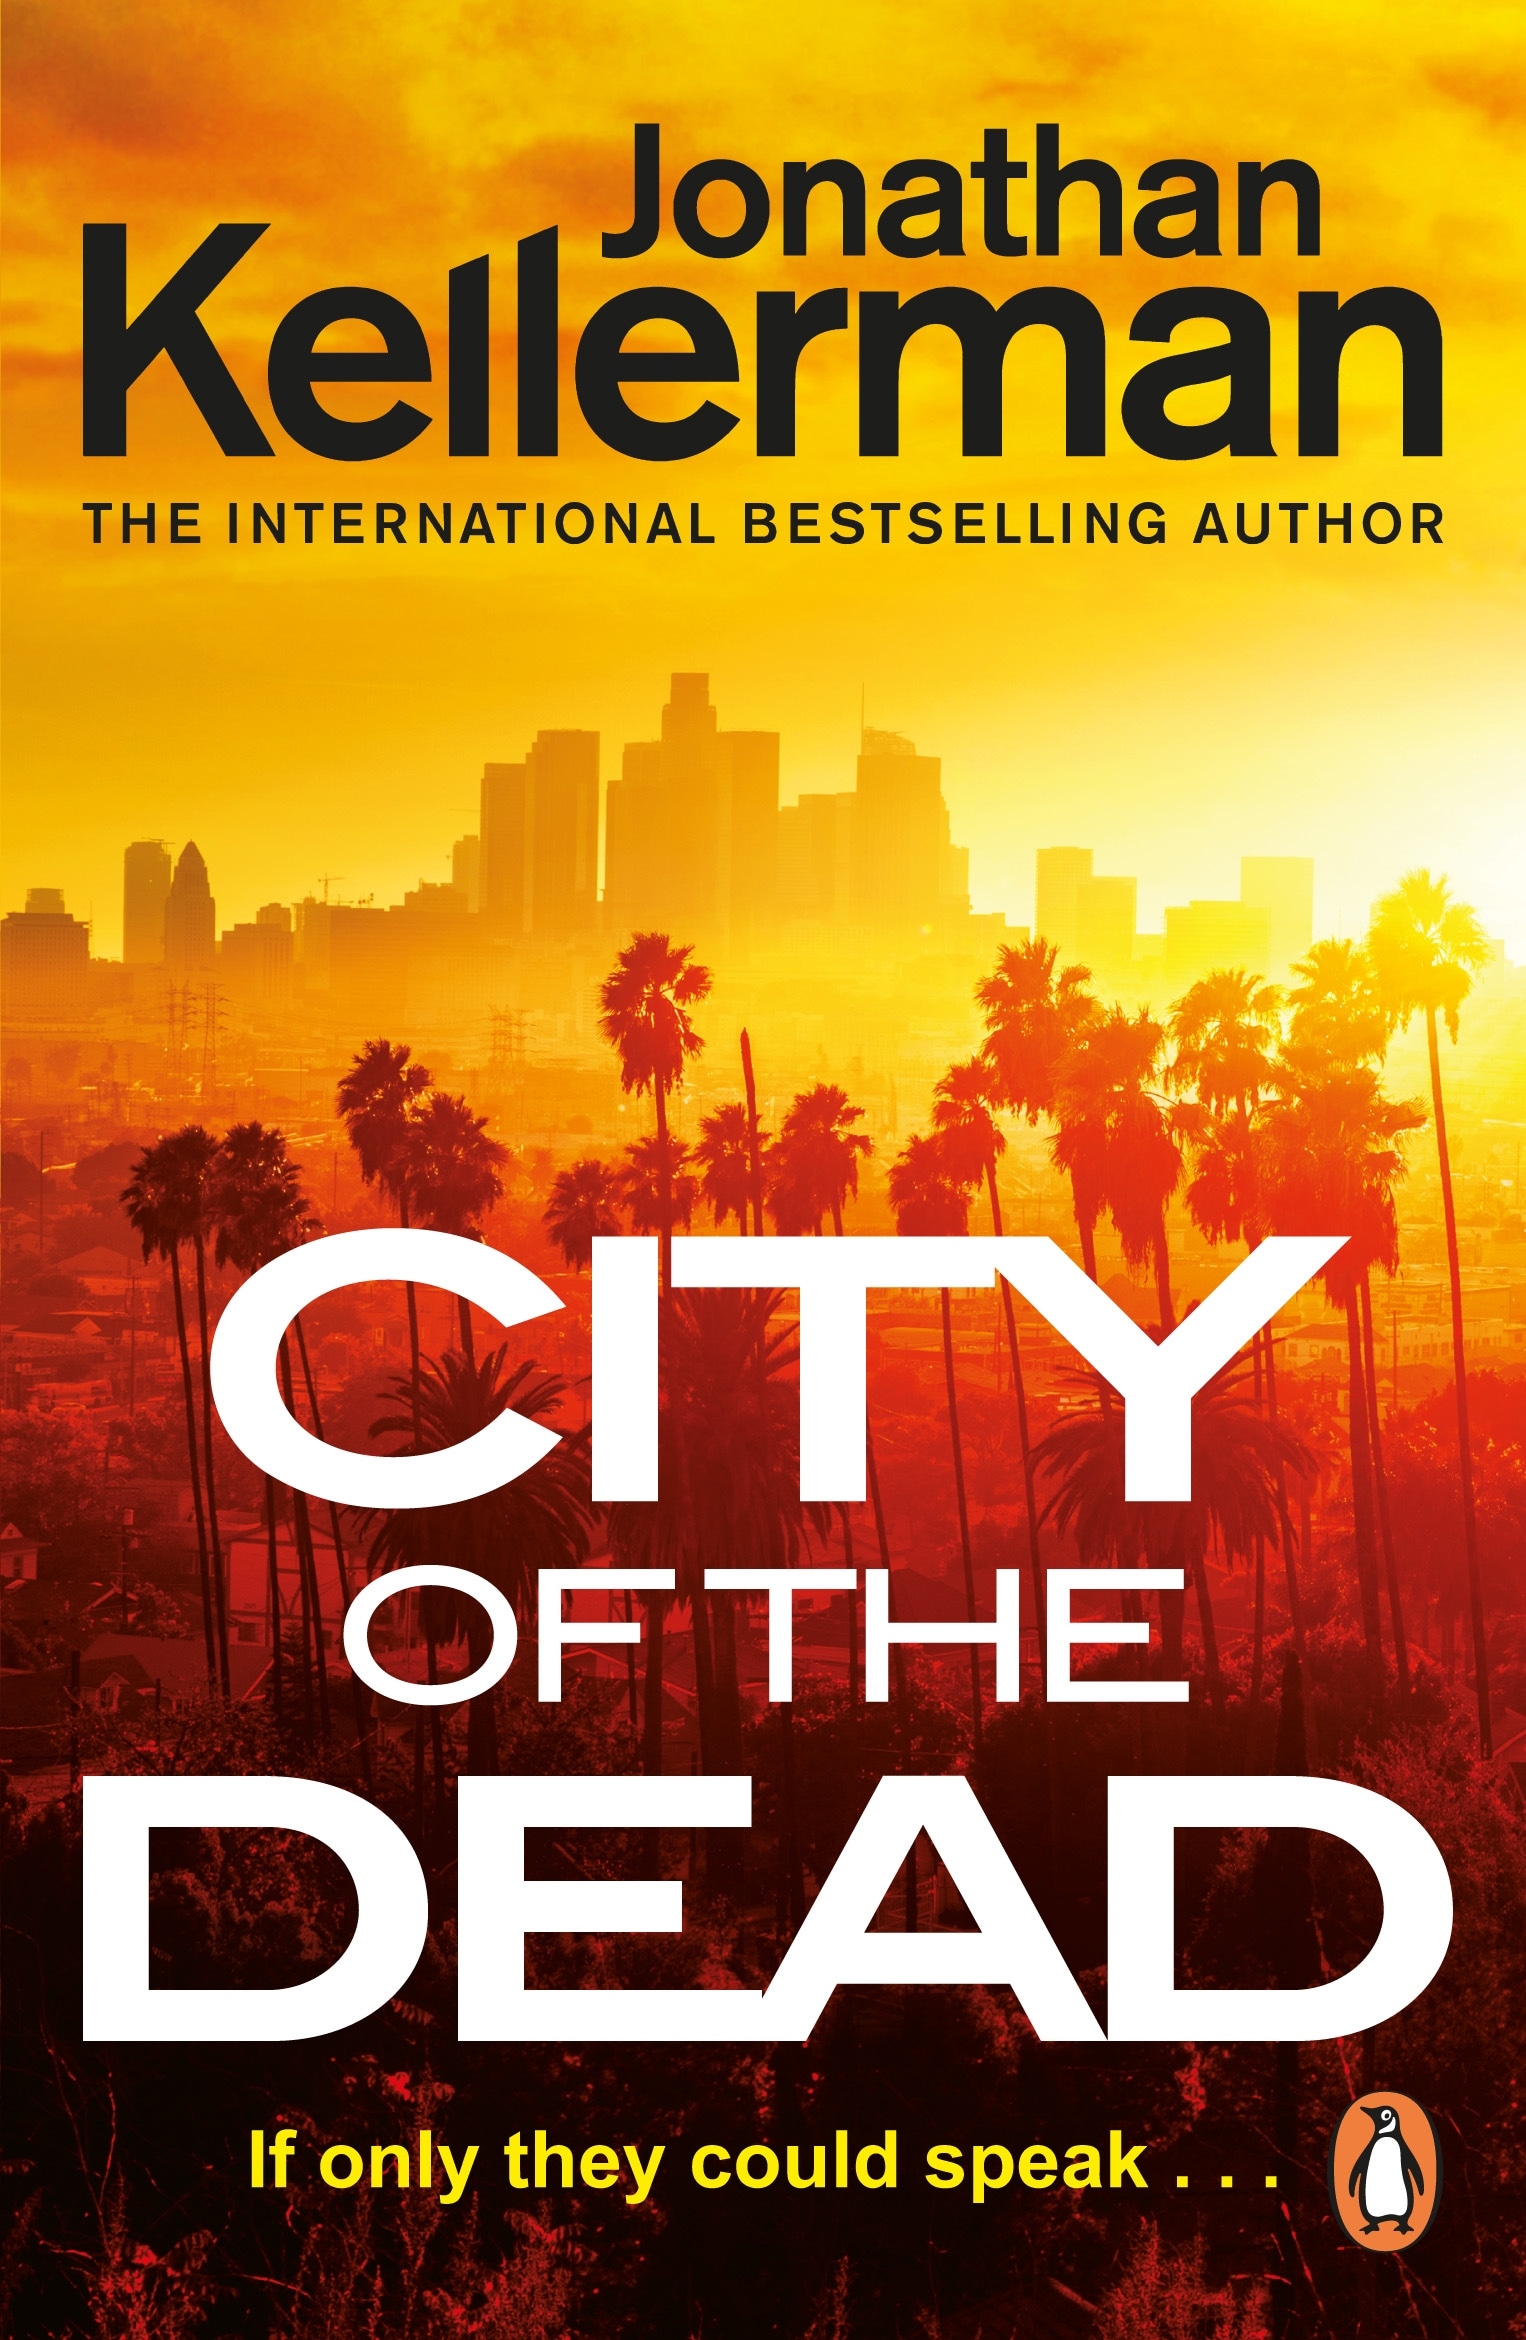 Book “City of the Dead” by Jonathan Kellerman — October 27, 2022